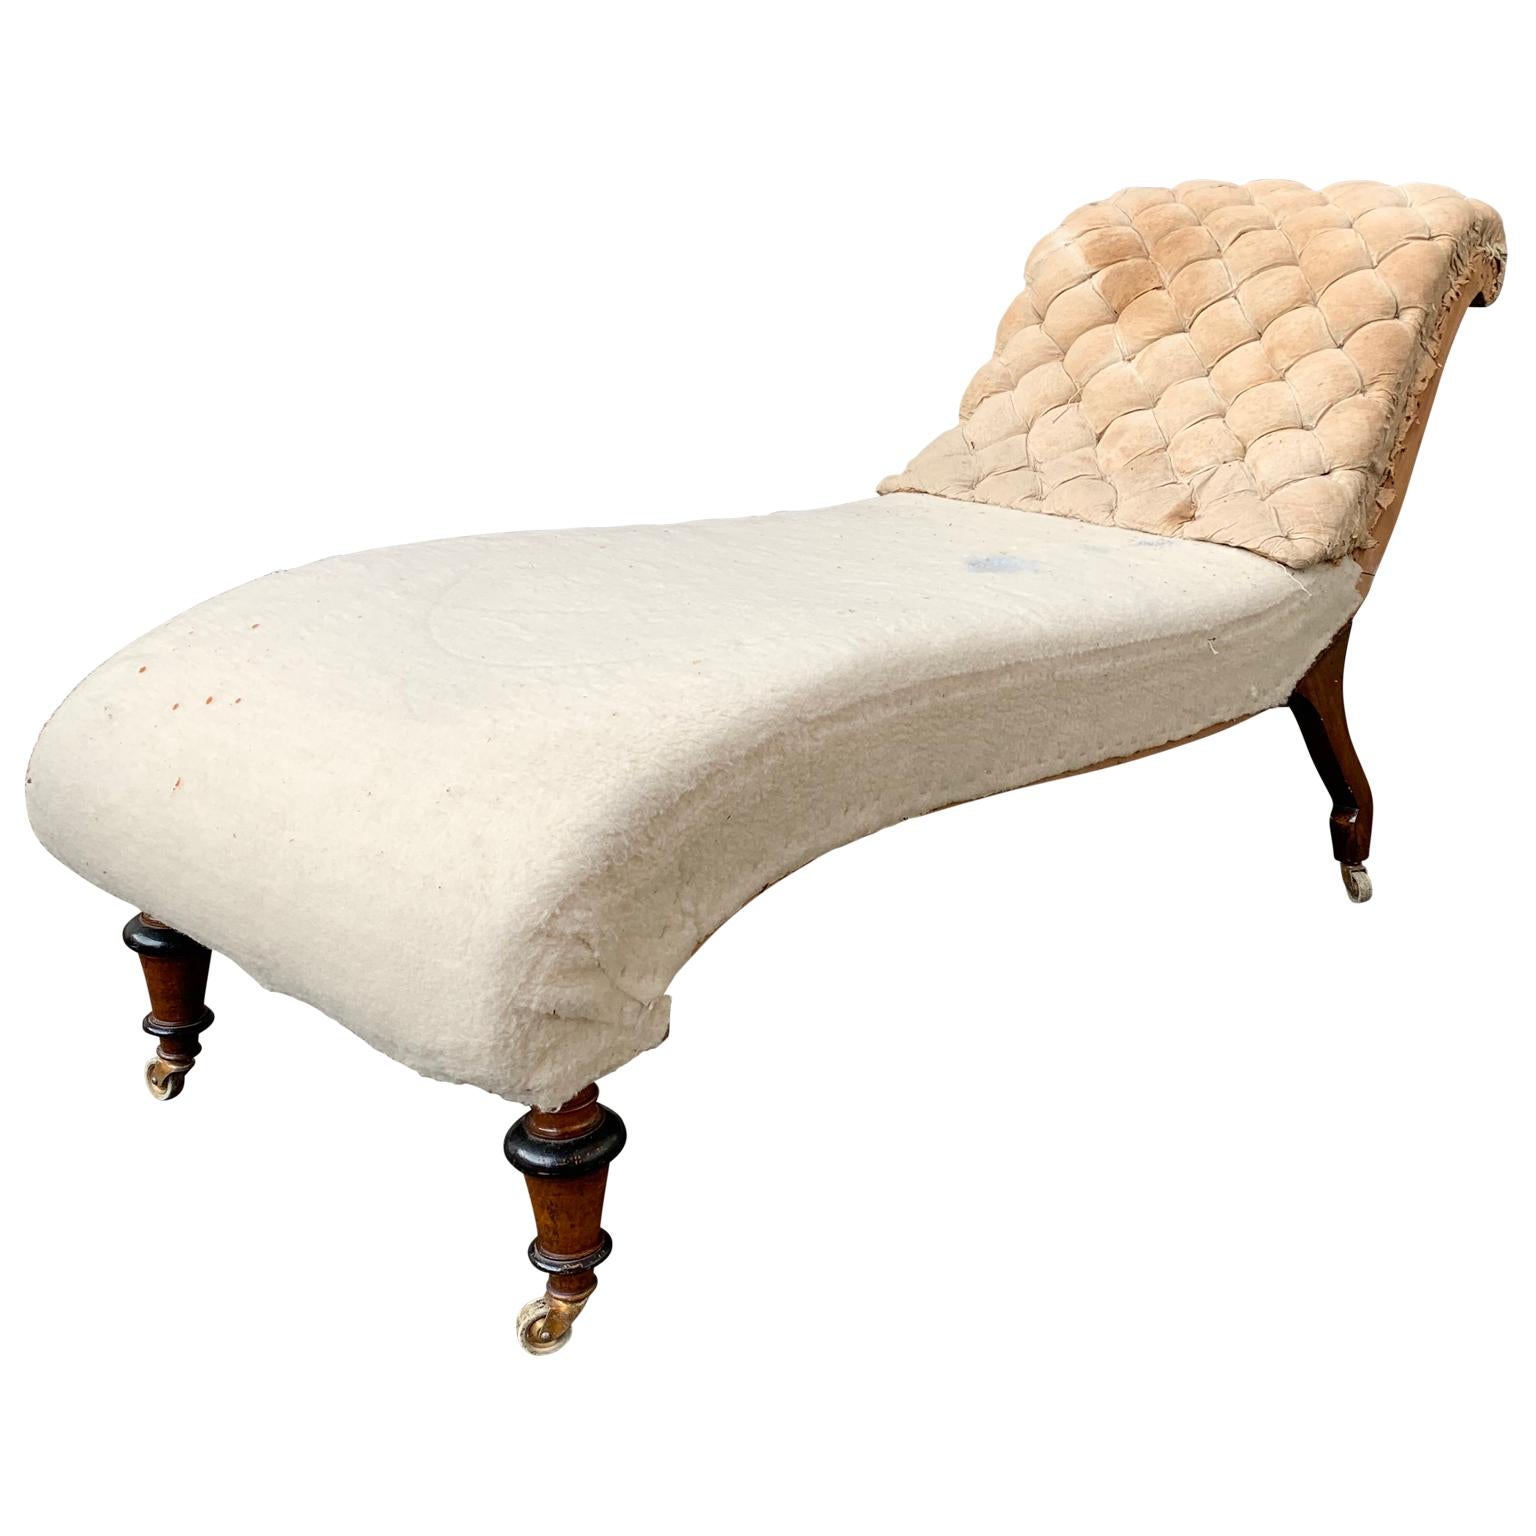 Carved Swedish 19th Century Napoleon III Un-Upholstered Daybed